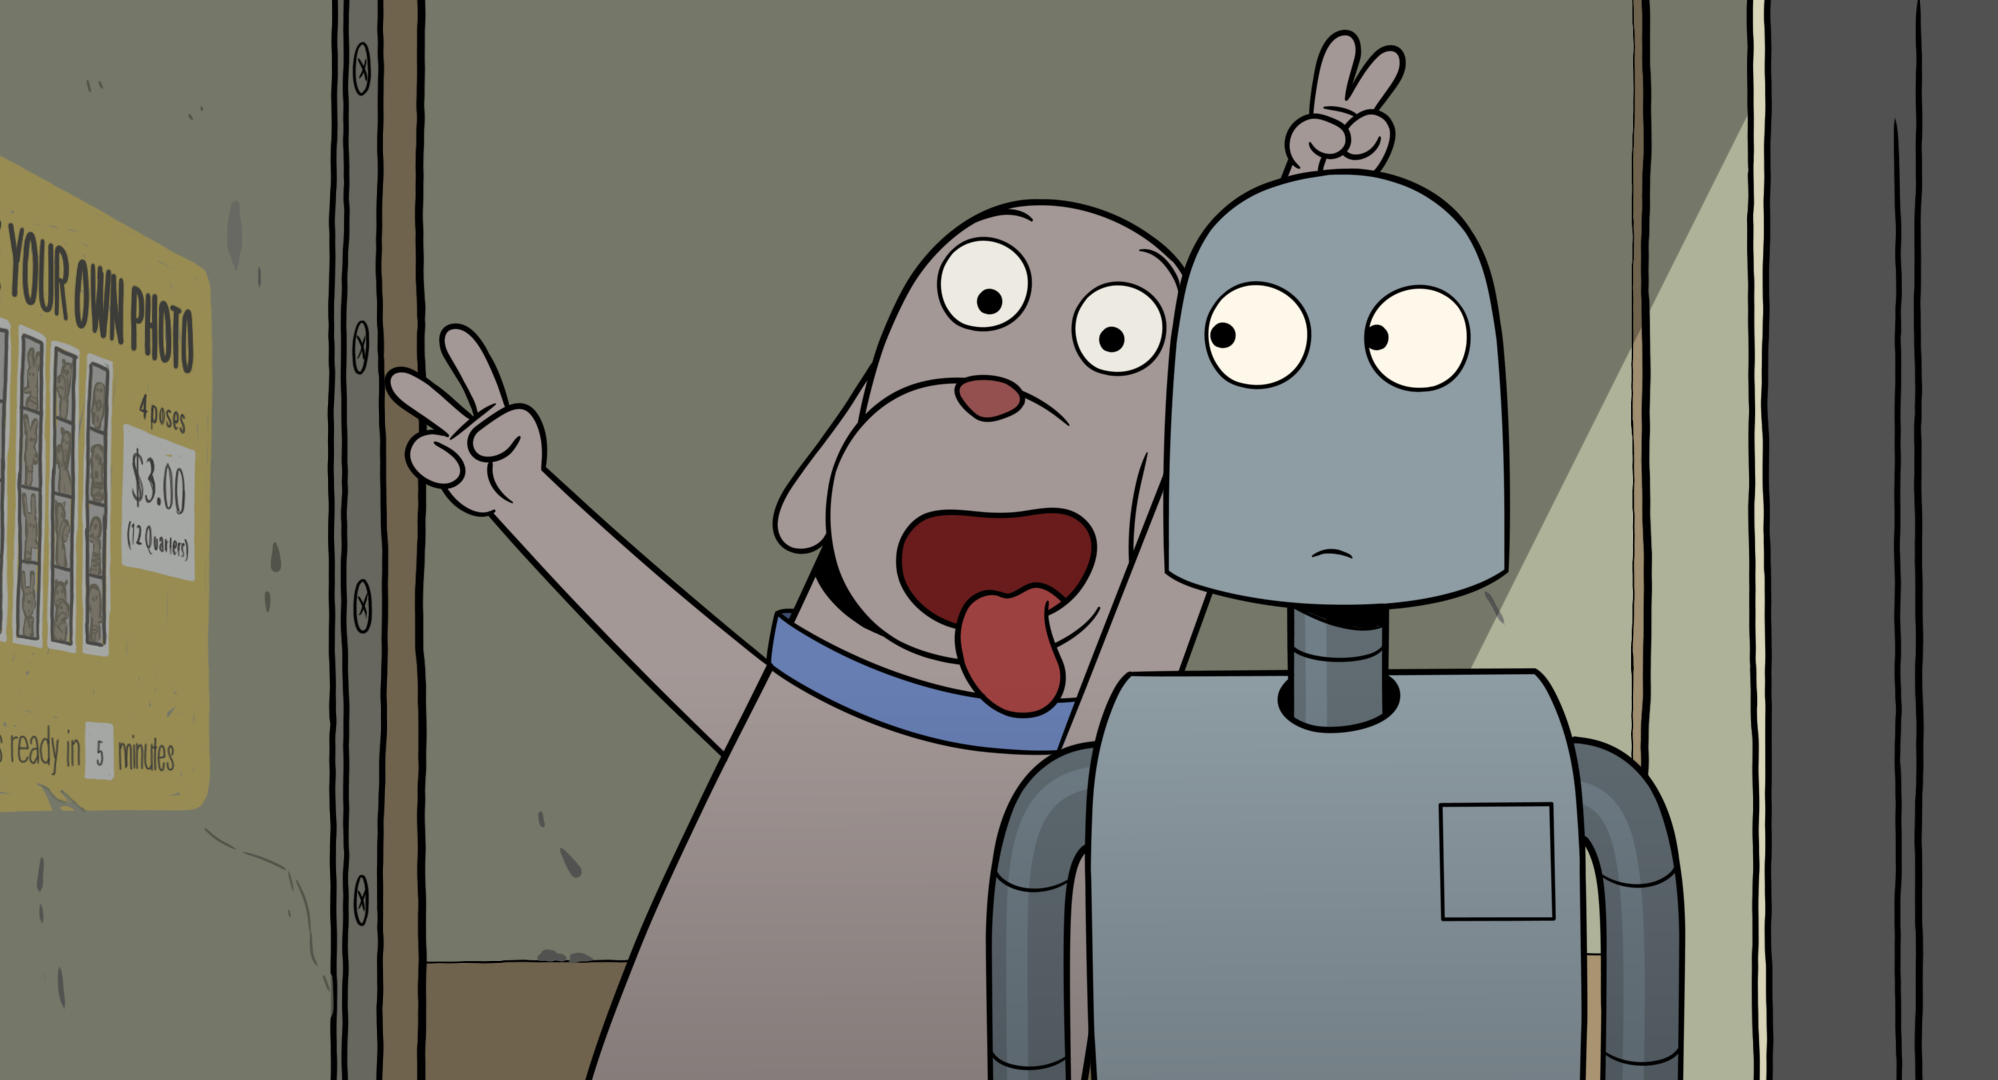 An animated dog and robot pose for a funny picture